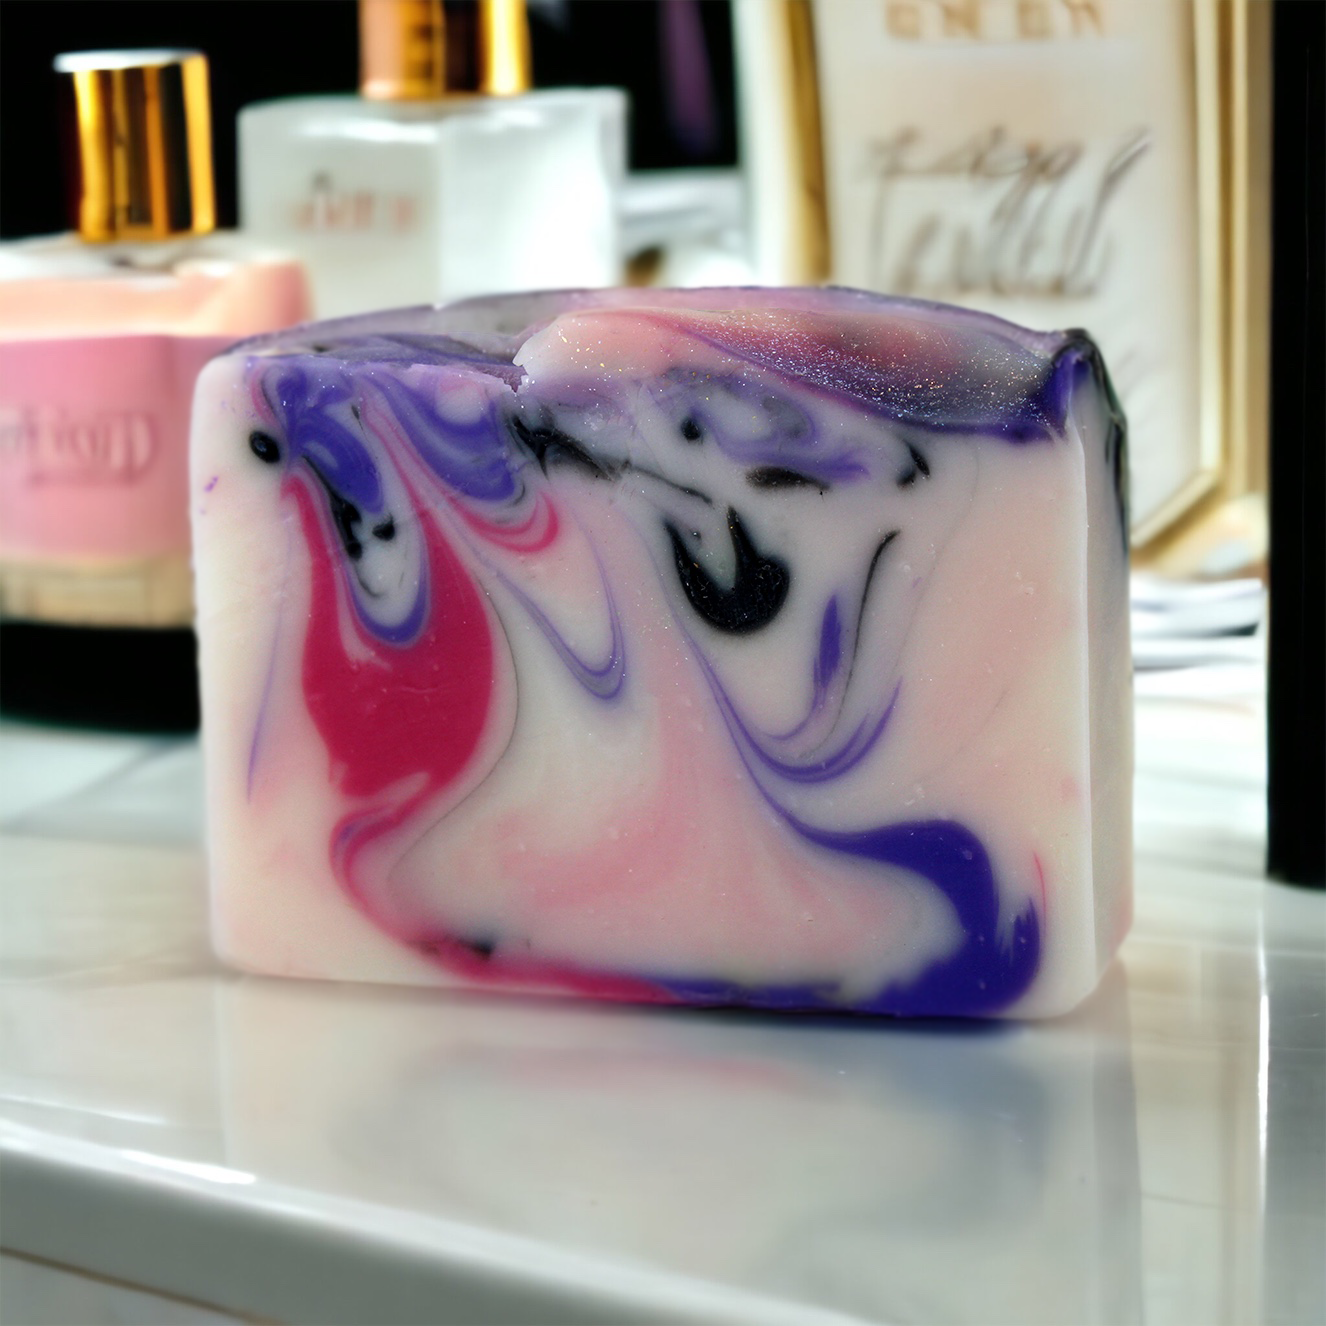 Femme Fatale Bar Soap on white marble counter with perfume bottles on the background, Alpaca Soaps AlpacaSoaps